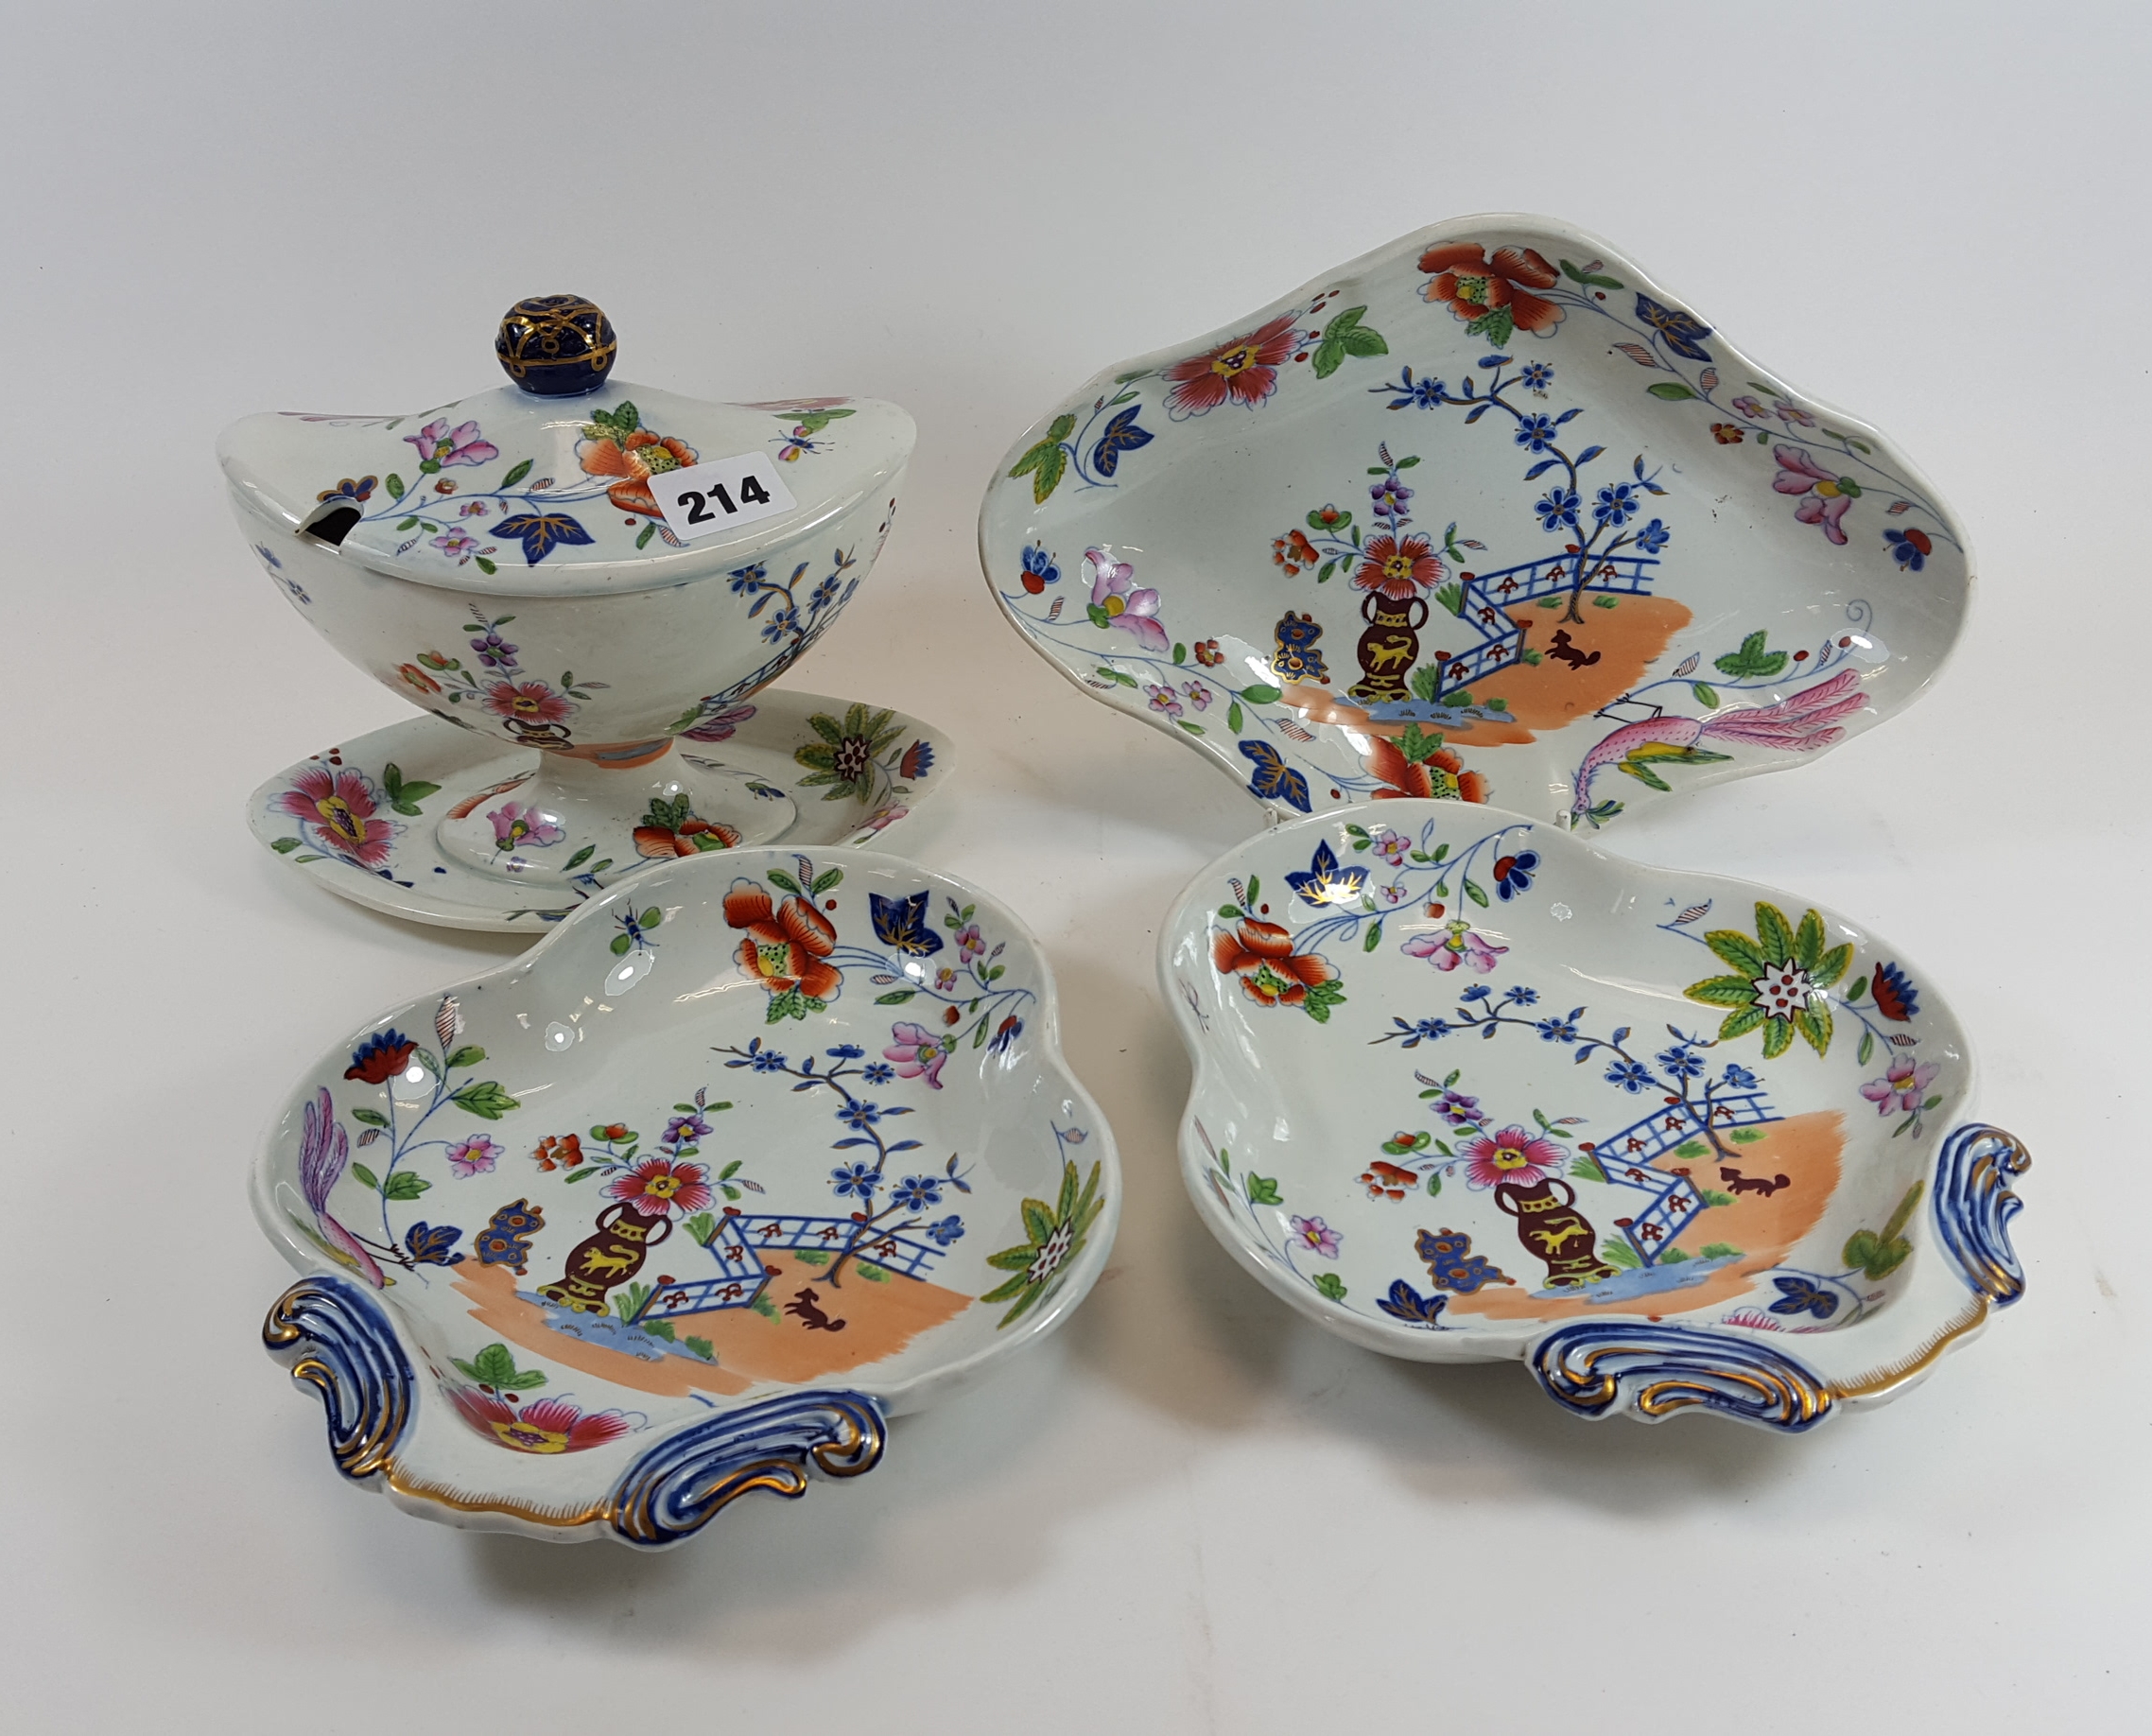 AN EARLY 19TH CENTURY SPODE TYPE SAUCE TUREEN with integral stand and cover decorated with